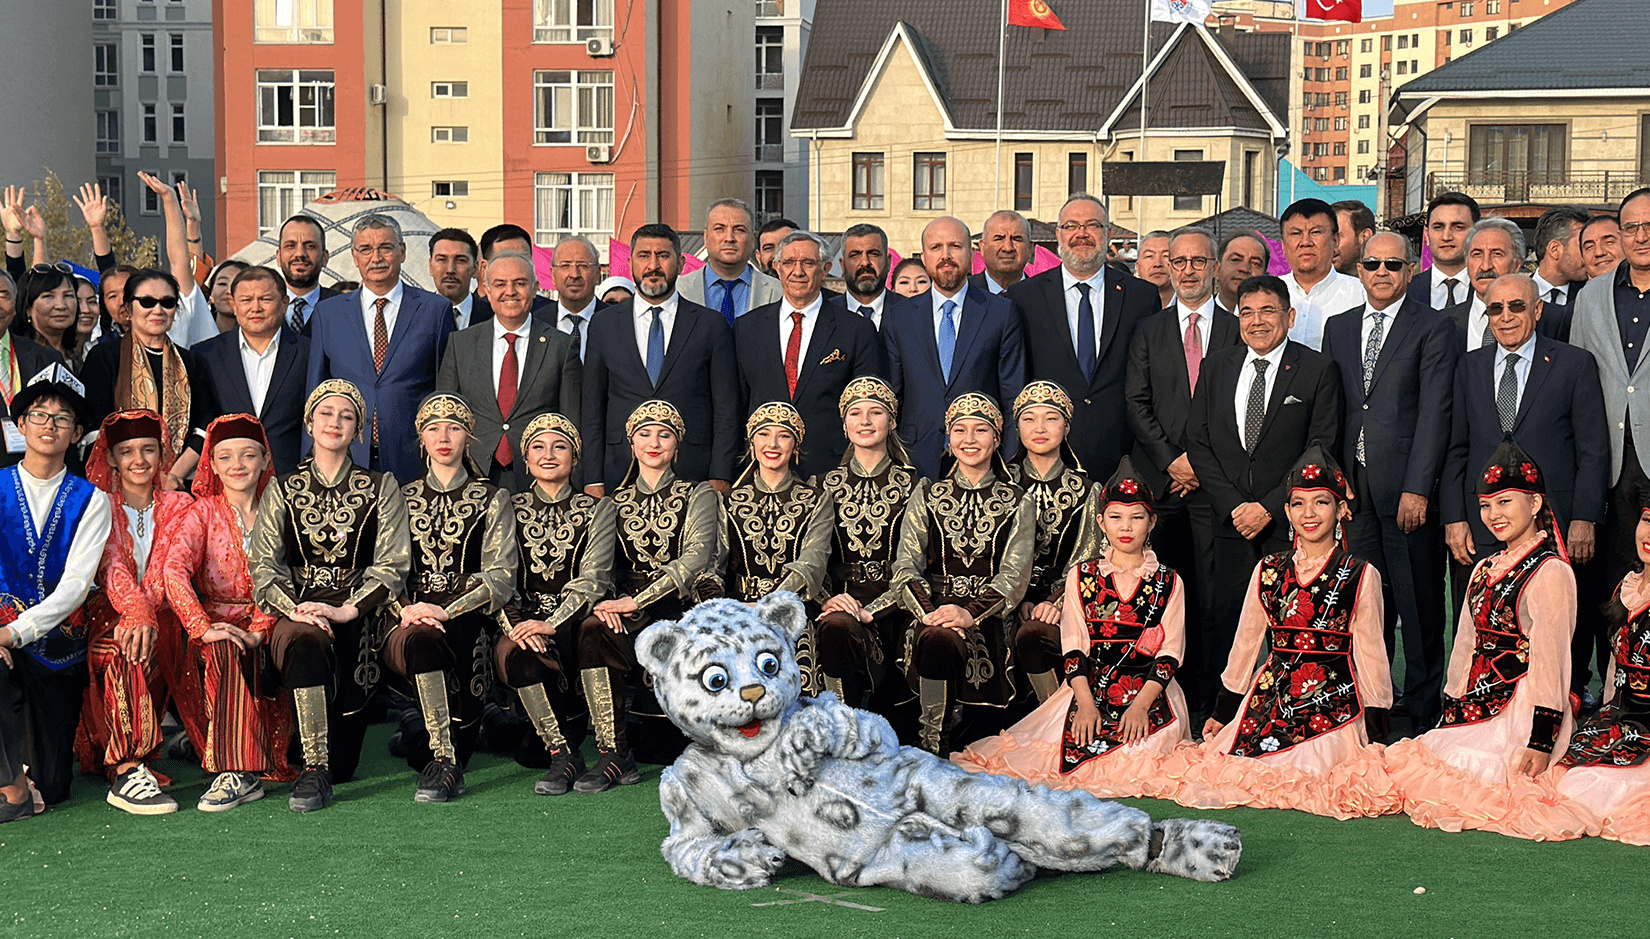 Opening Ceremony of the 1st Traditional Sports Games of the Union of Turkic Universities of the Organization of Turkic States was held